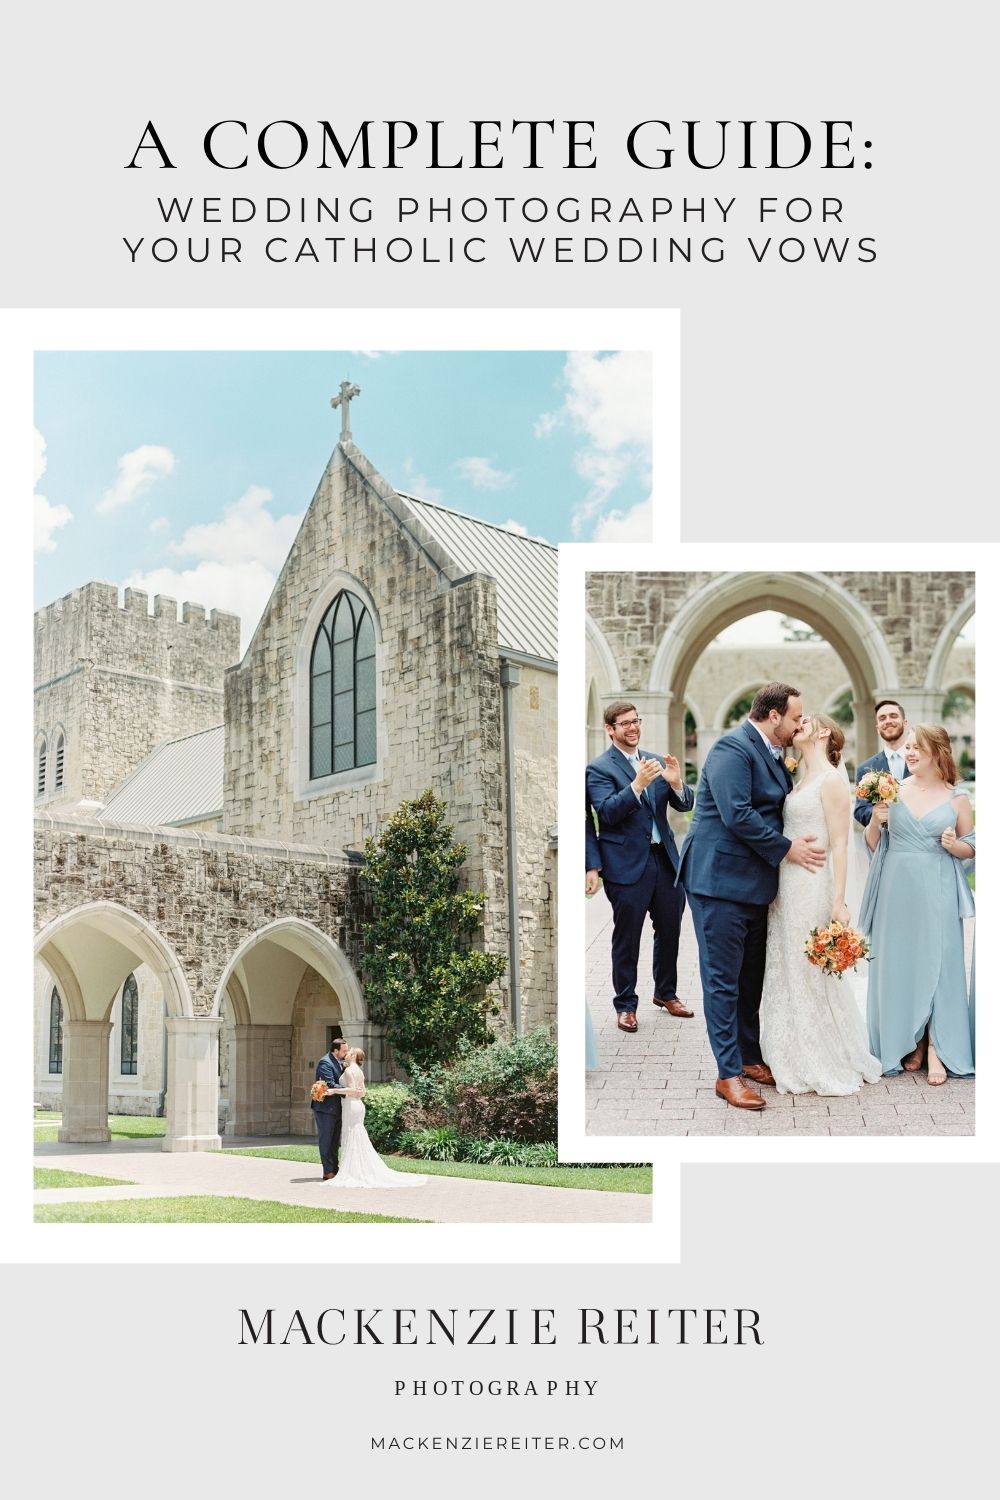 A collage of wedding images at a Catholic church wedding venue; image overlaid with text that reads A Complete Guide: Wedding Photography for your Catholic Wedding Vows